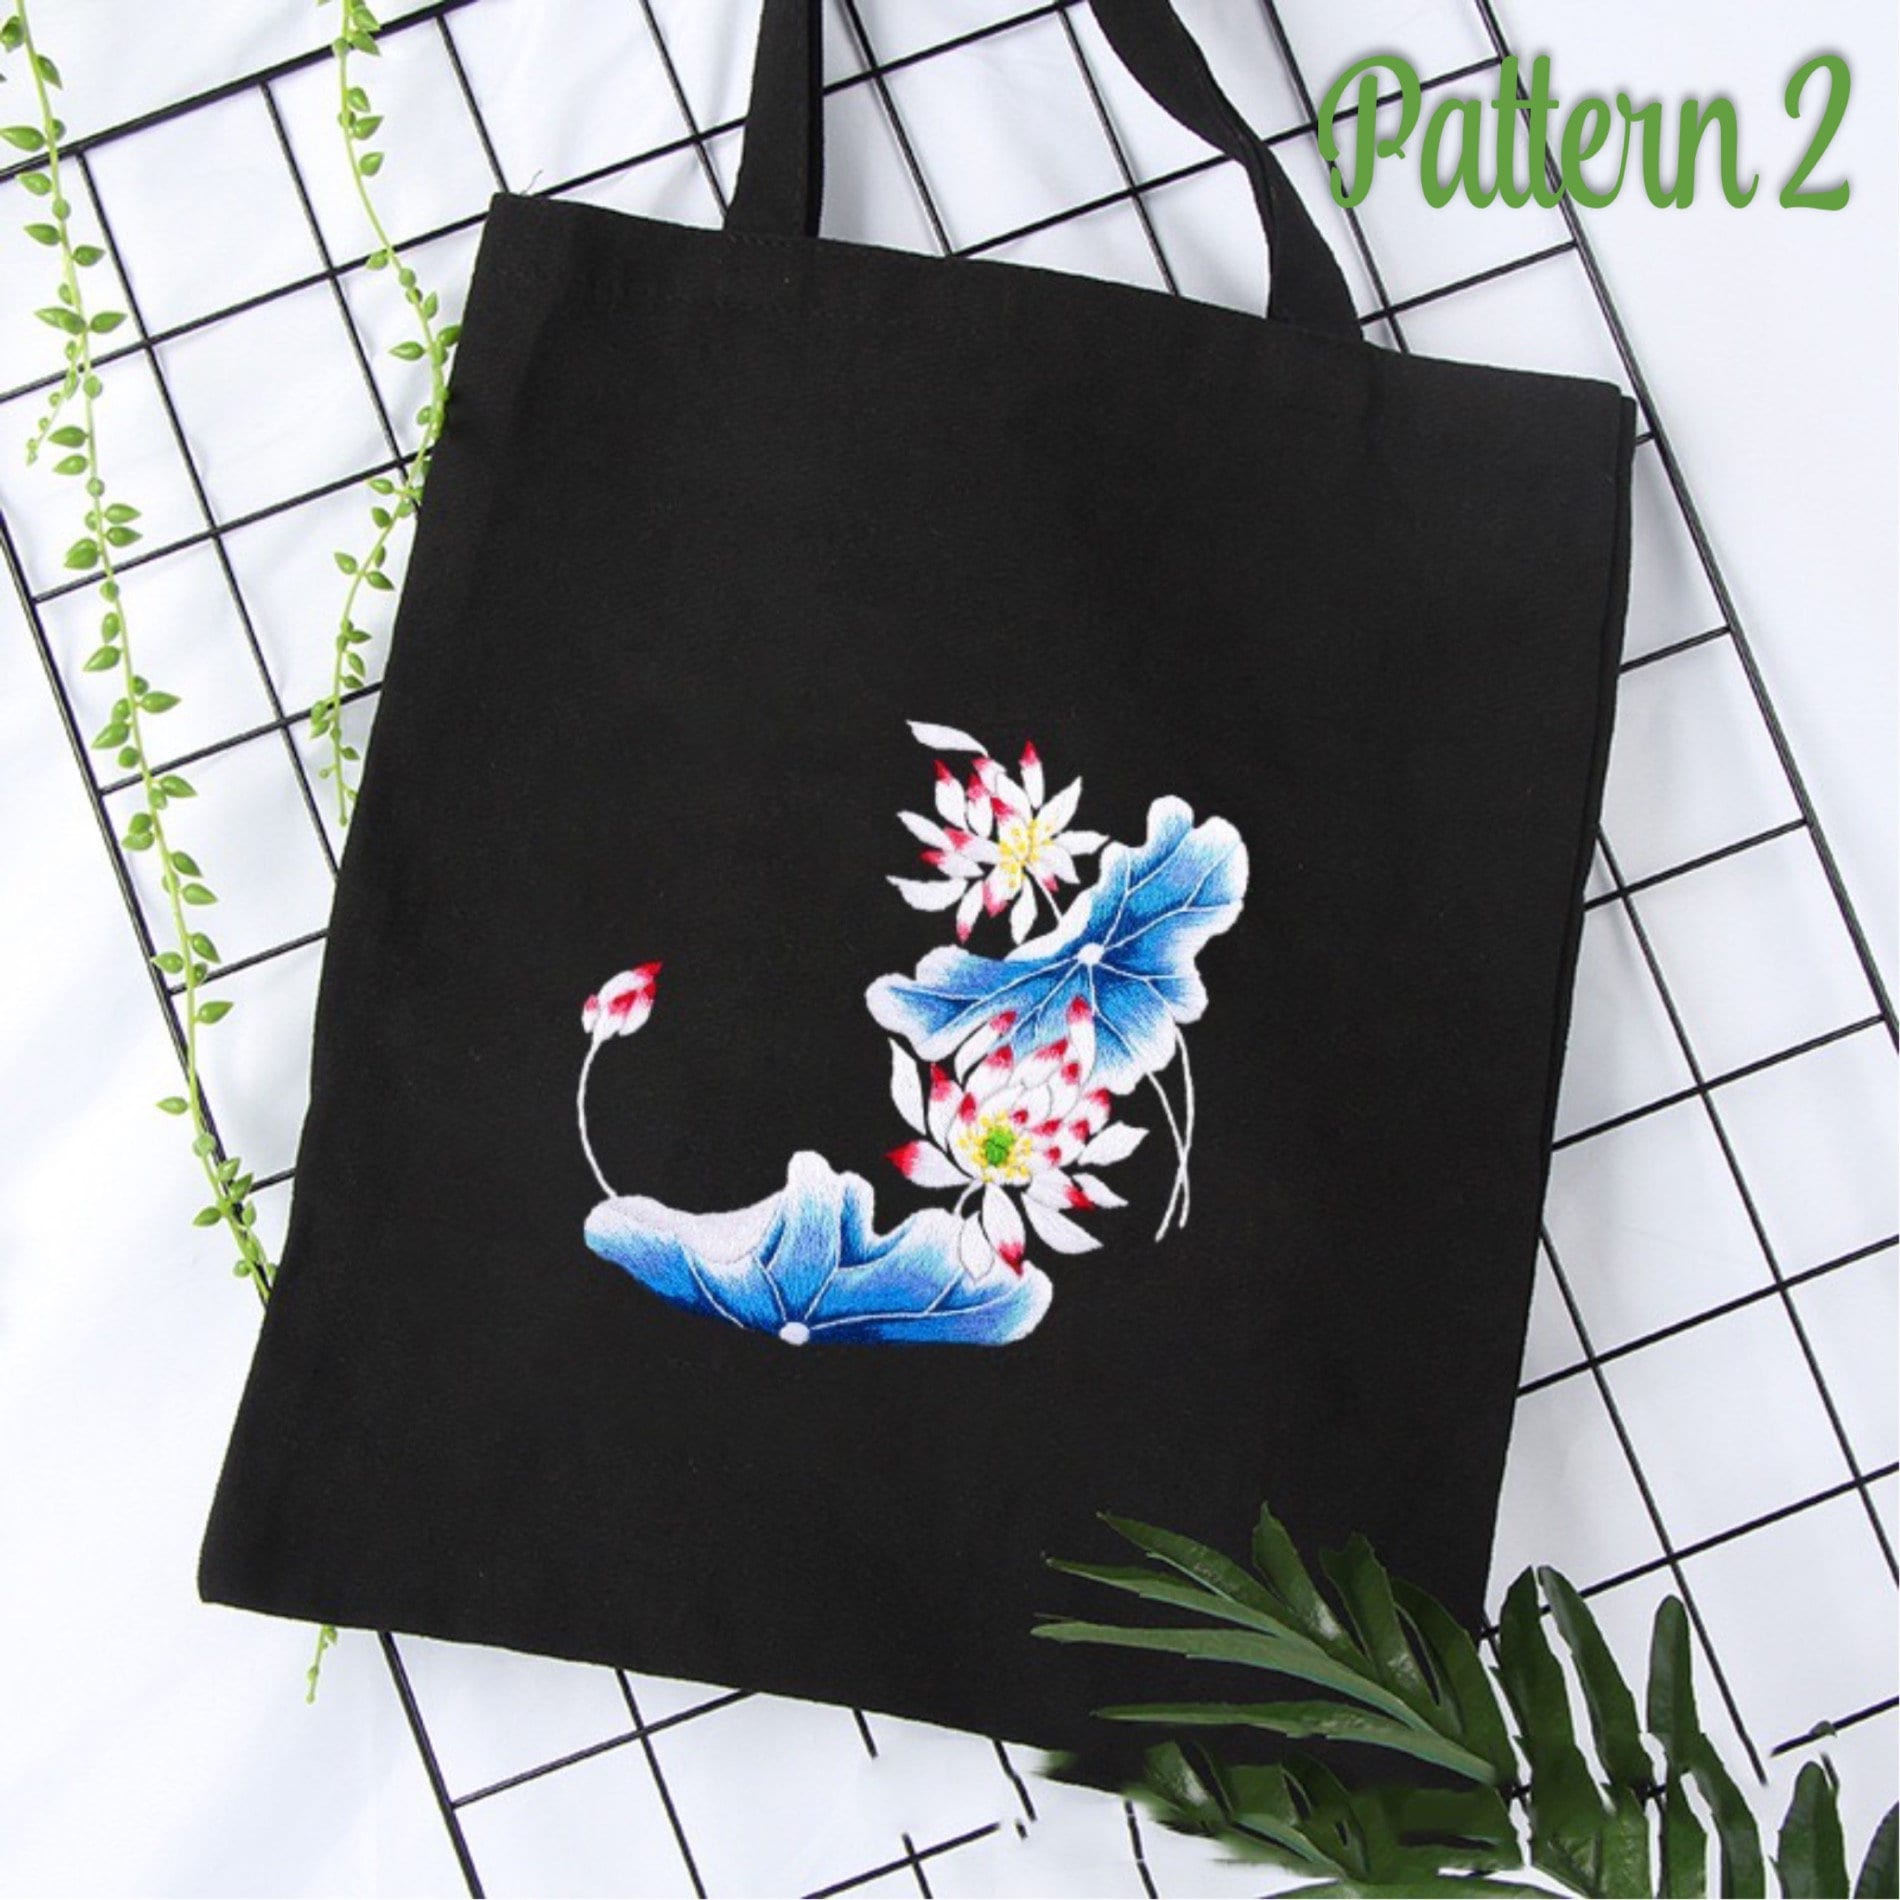 2Pack DIY Canvas Tote Bag Embroidery Kit,Black Canvas Bag Flower Cross  Stitch Kit with Pattern and Instruction Personalized Bag Funny Hand  Needlepoint